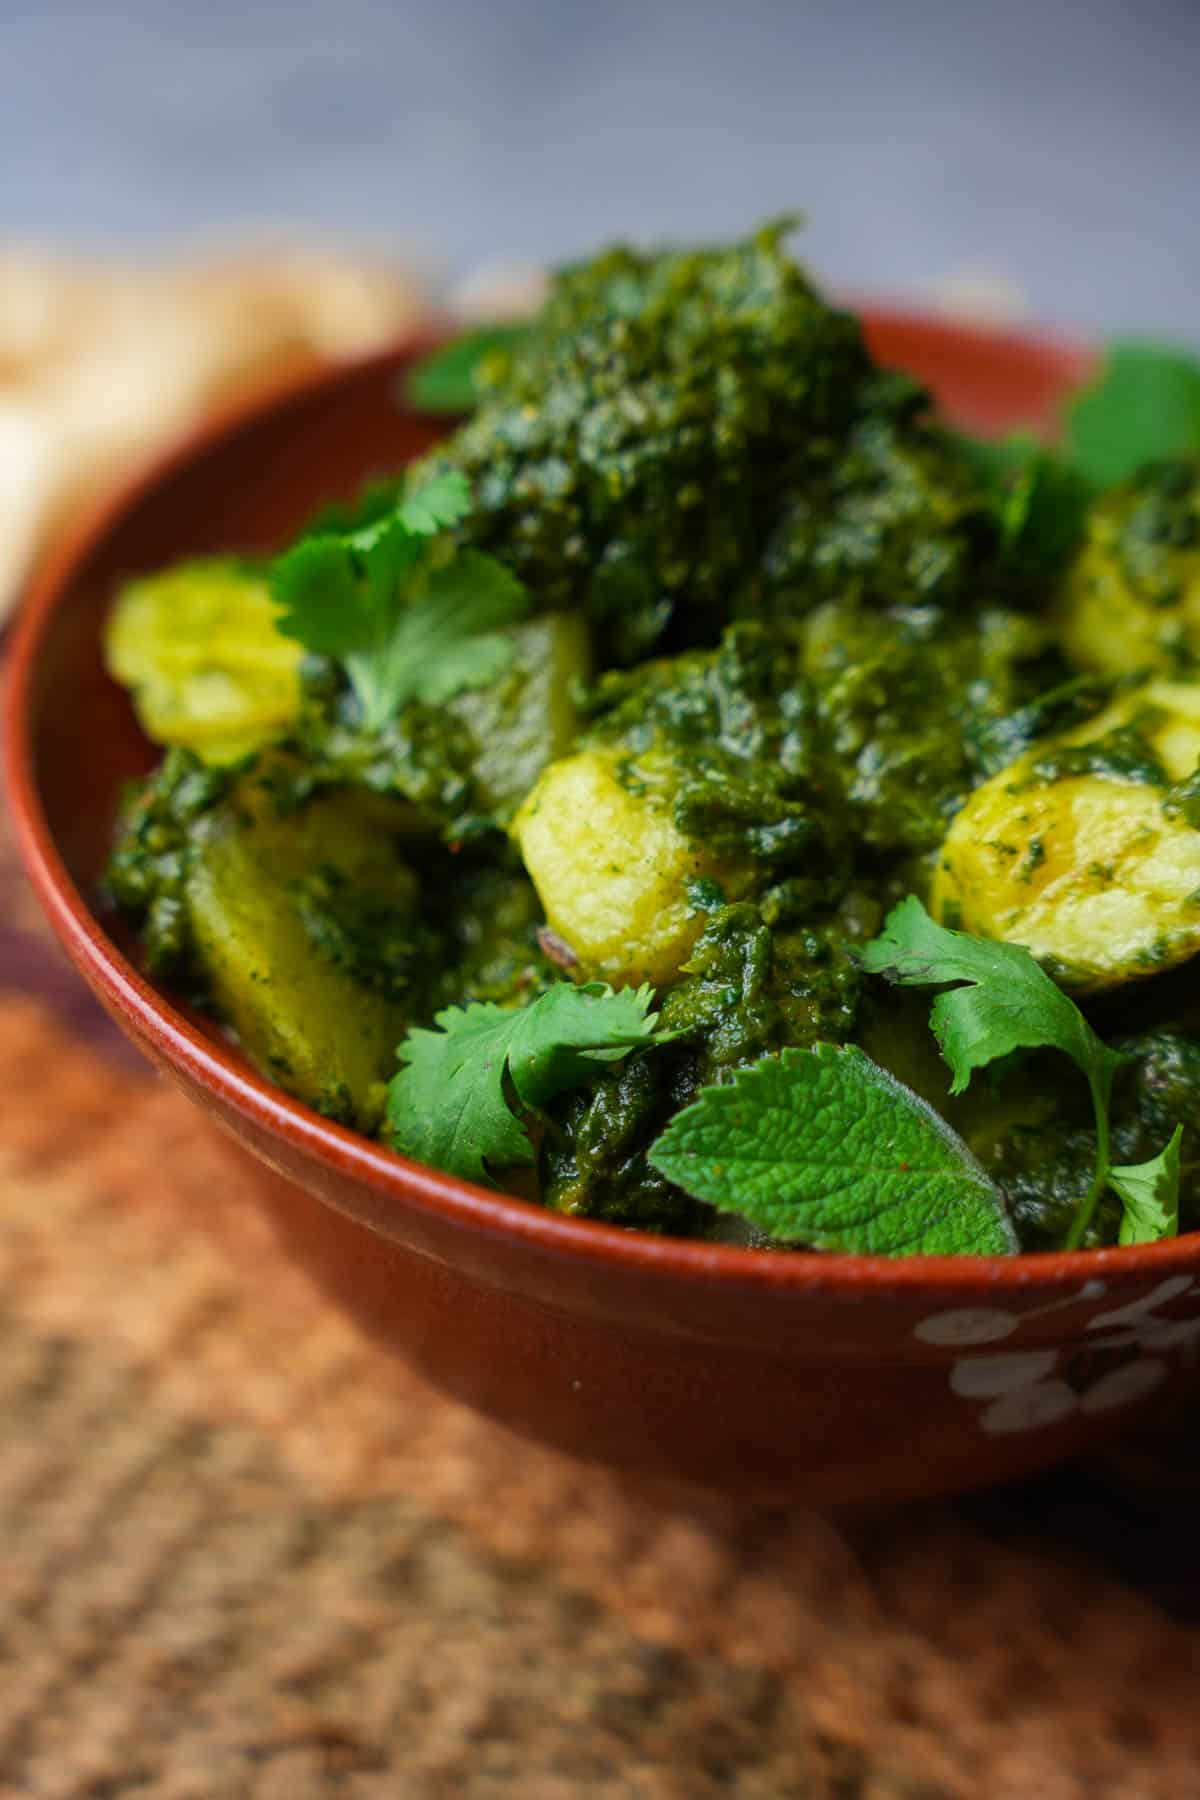 Saag aloo garnished with cilantro and mint leaves in a red ceramic bowl on a woven mat.